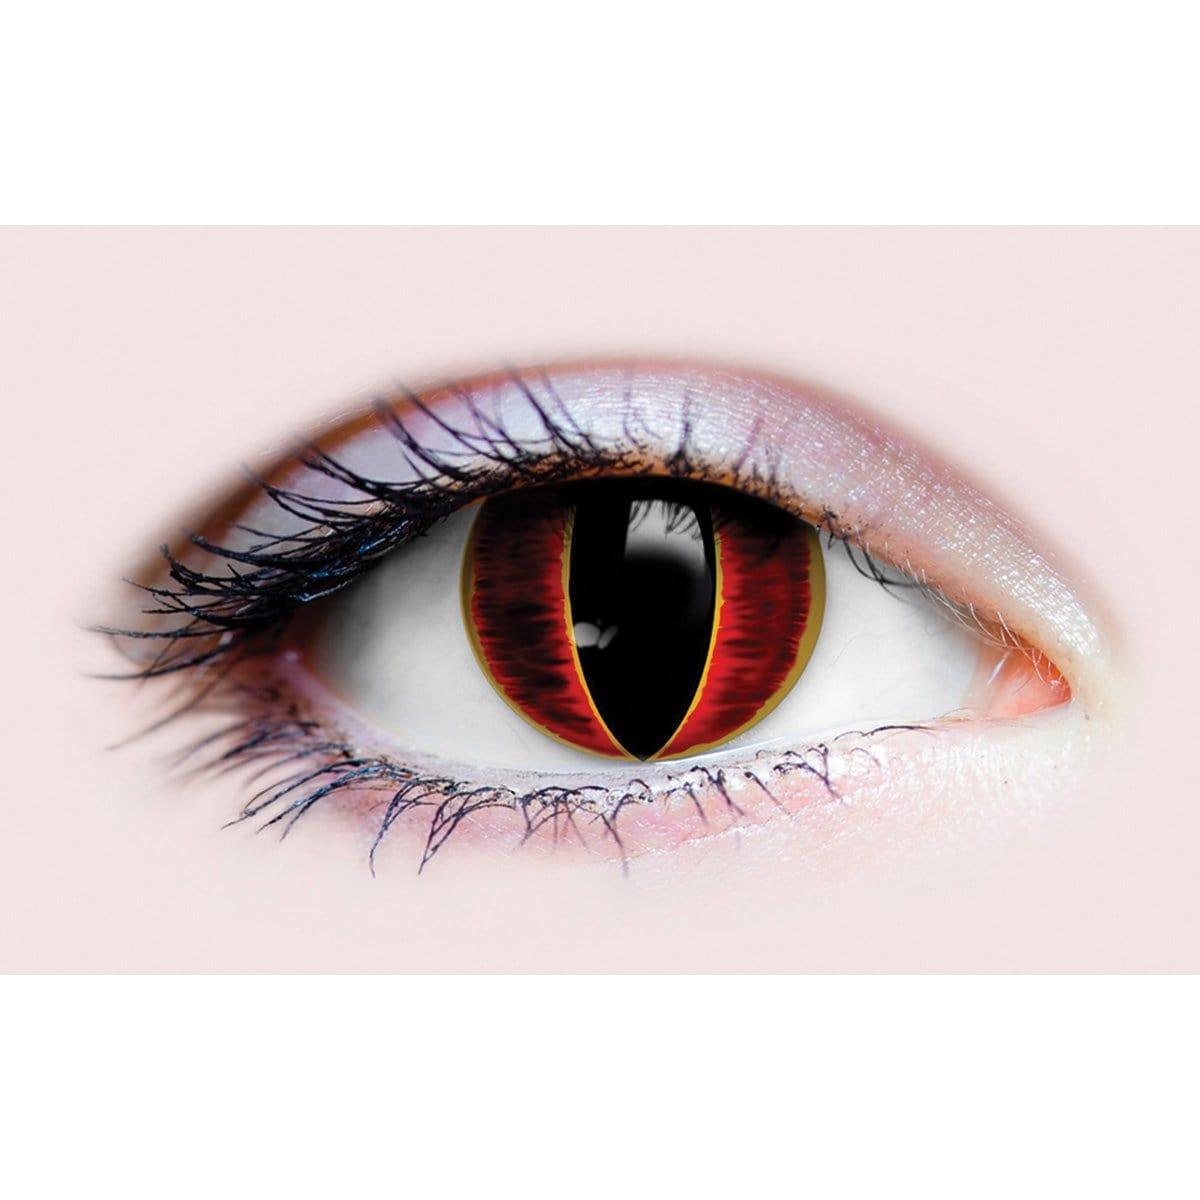 Buy Costume Accessories Sauron contact lenses, 3 months usage sold at Party Expert